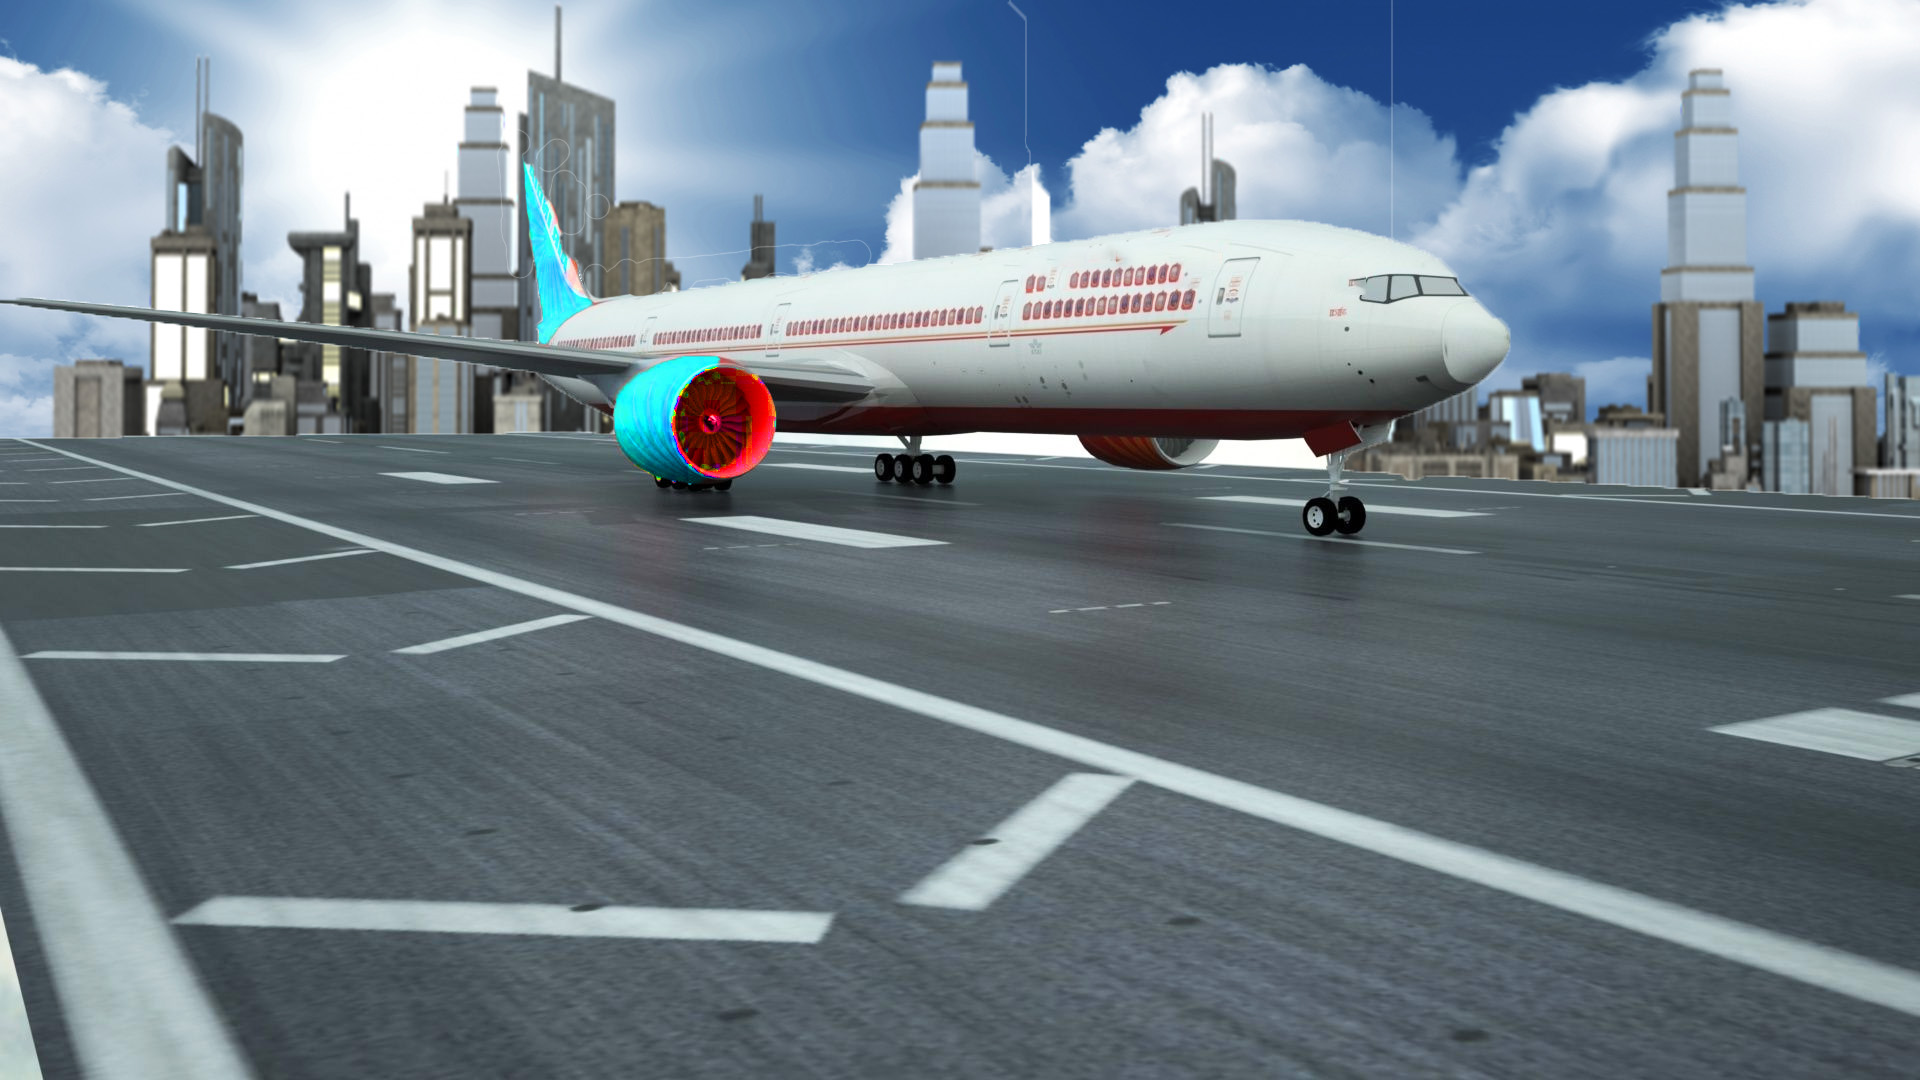 Download Airplane Flying Pilot Games on PC with MEmu